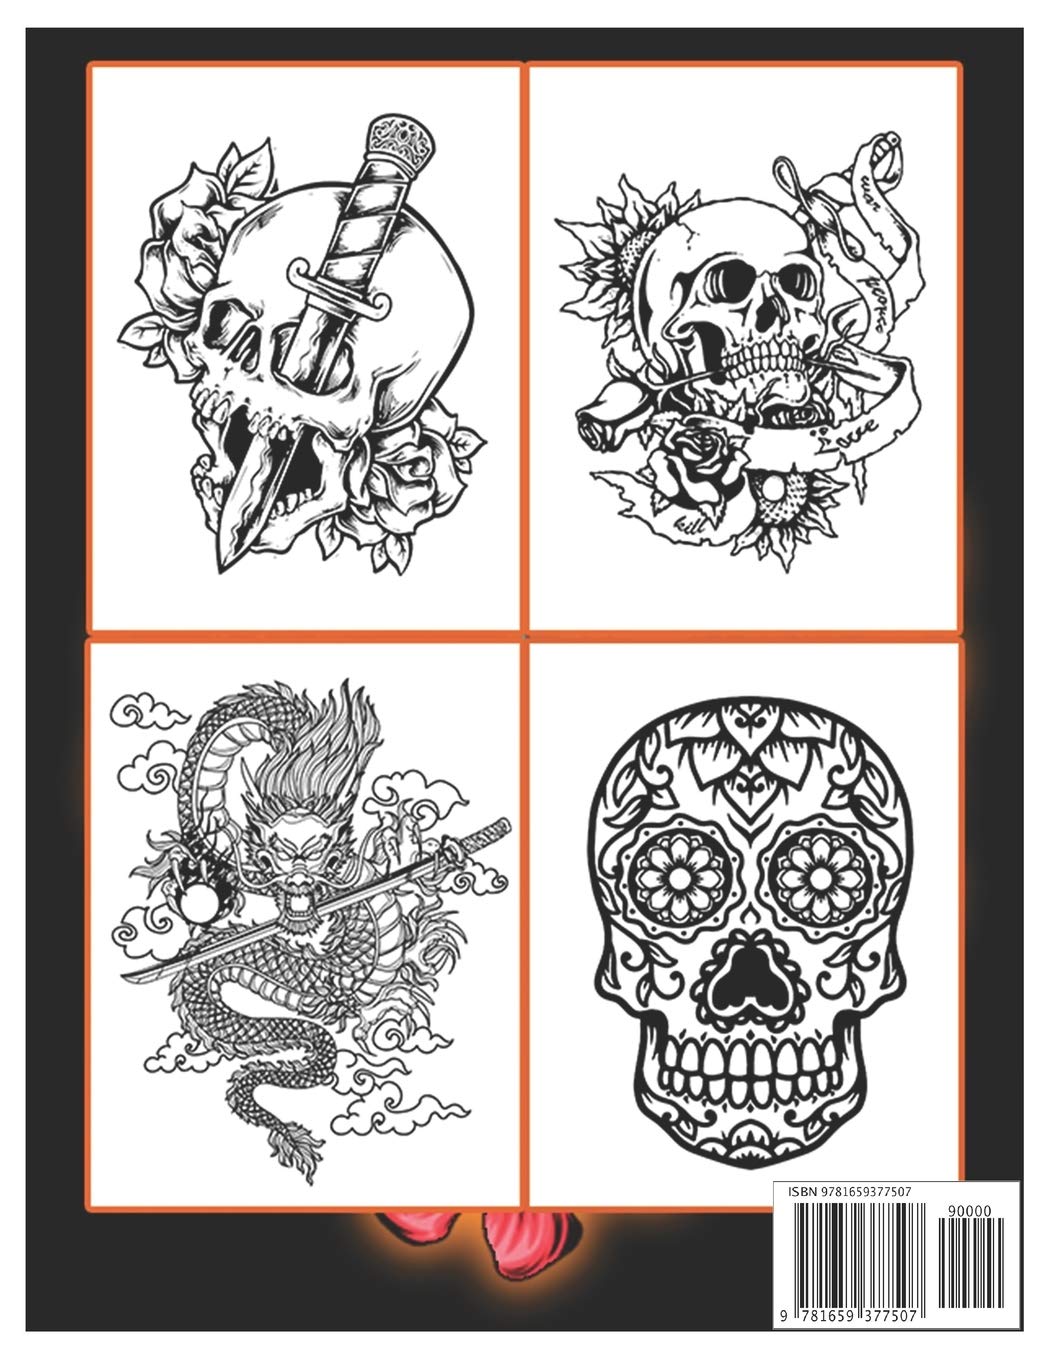 50 Tattoo Adult Coloring Book: An Adult Coloring Book with Awesome and Relaxing Beautiful Modern Tattoo Designs for Men and Women Coloring Pages